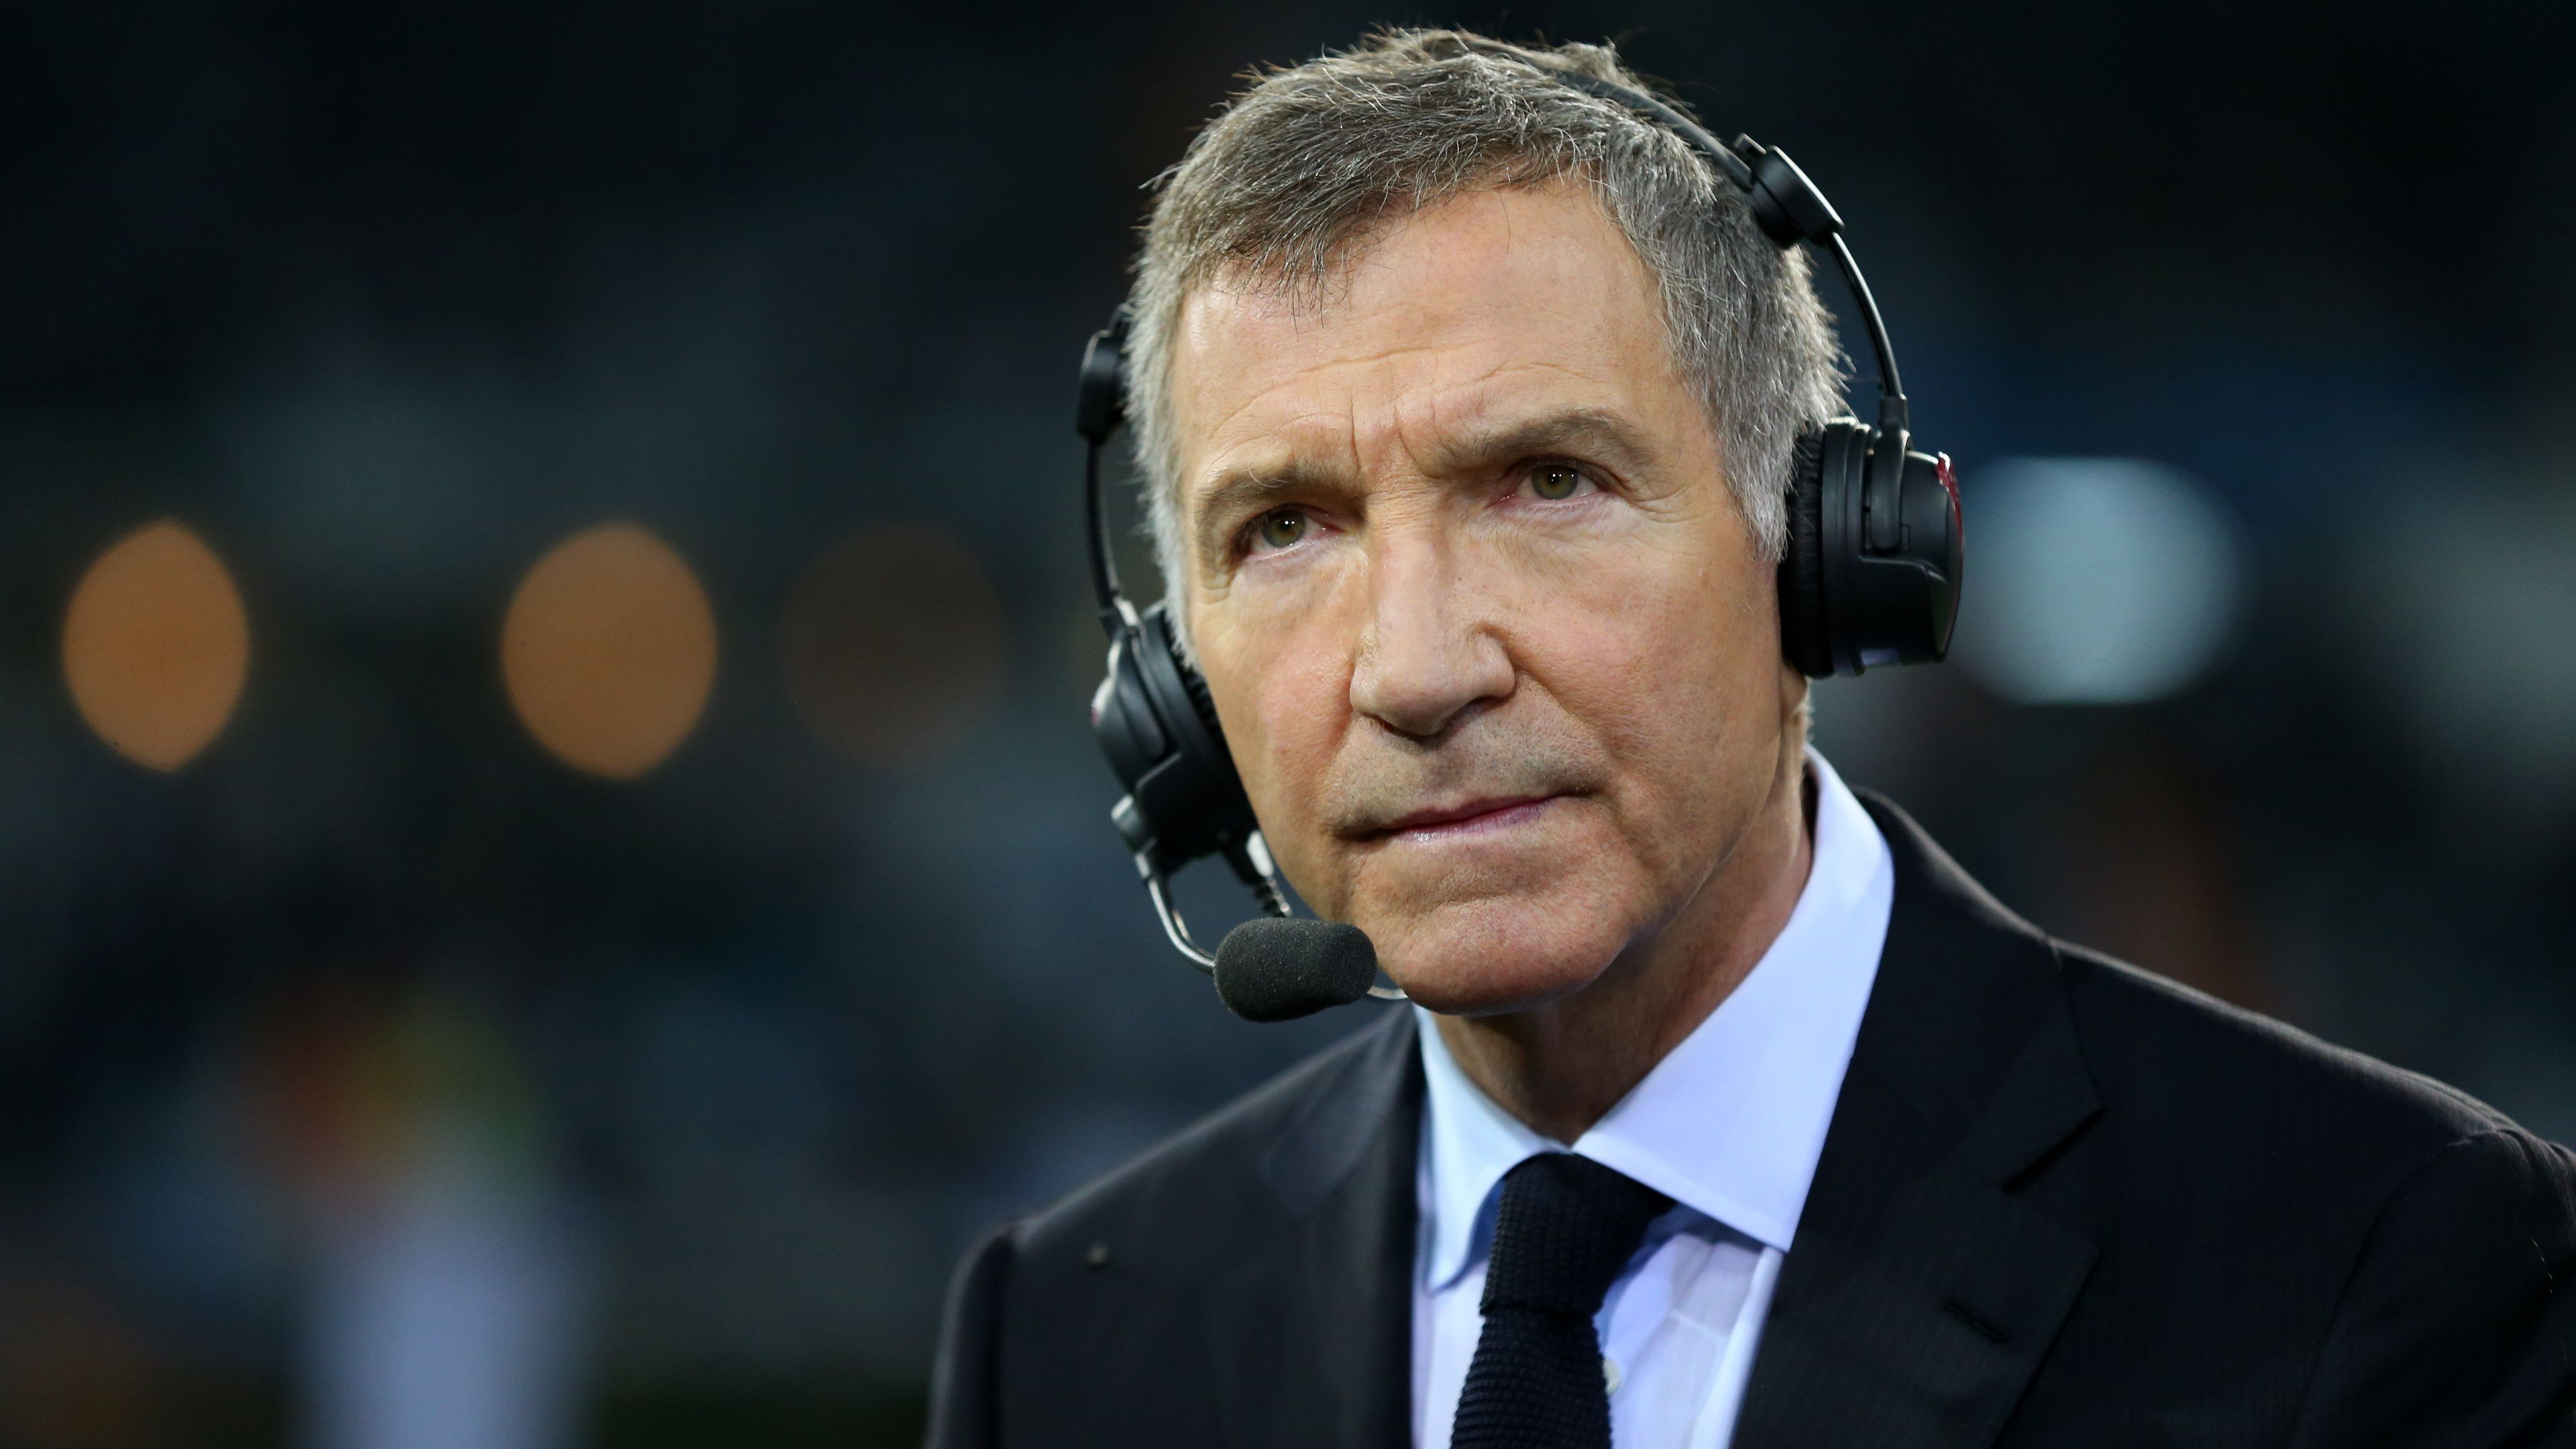 Football news: Graeme Souness response to 'man's game' comment backlash,  explanation